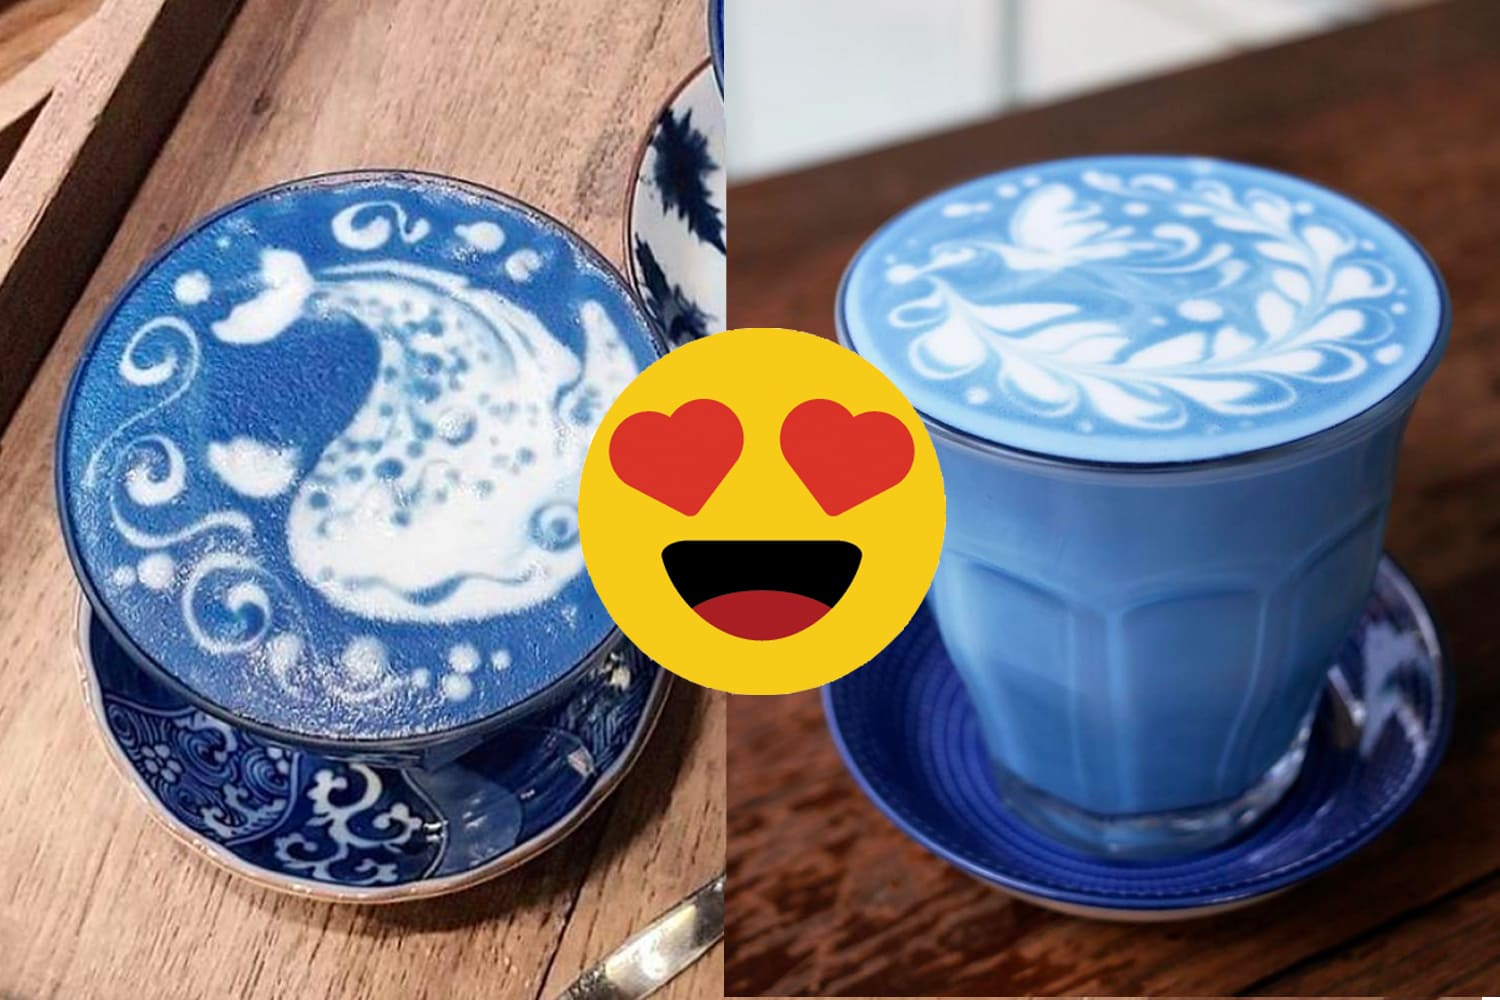 How To Make Butterfly Pea Tea